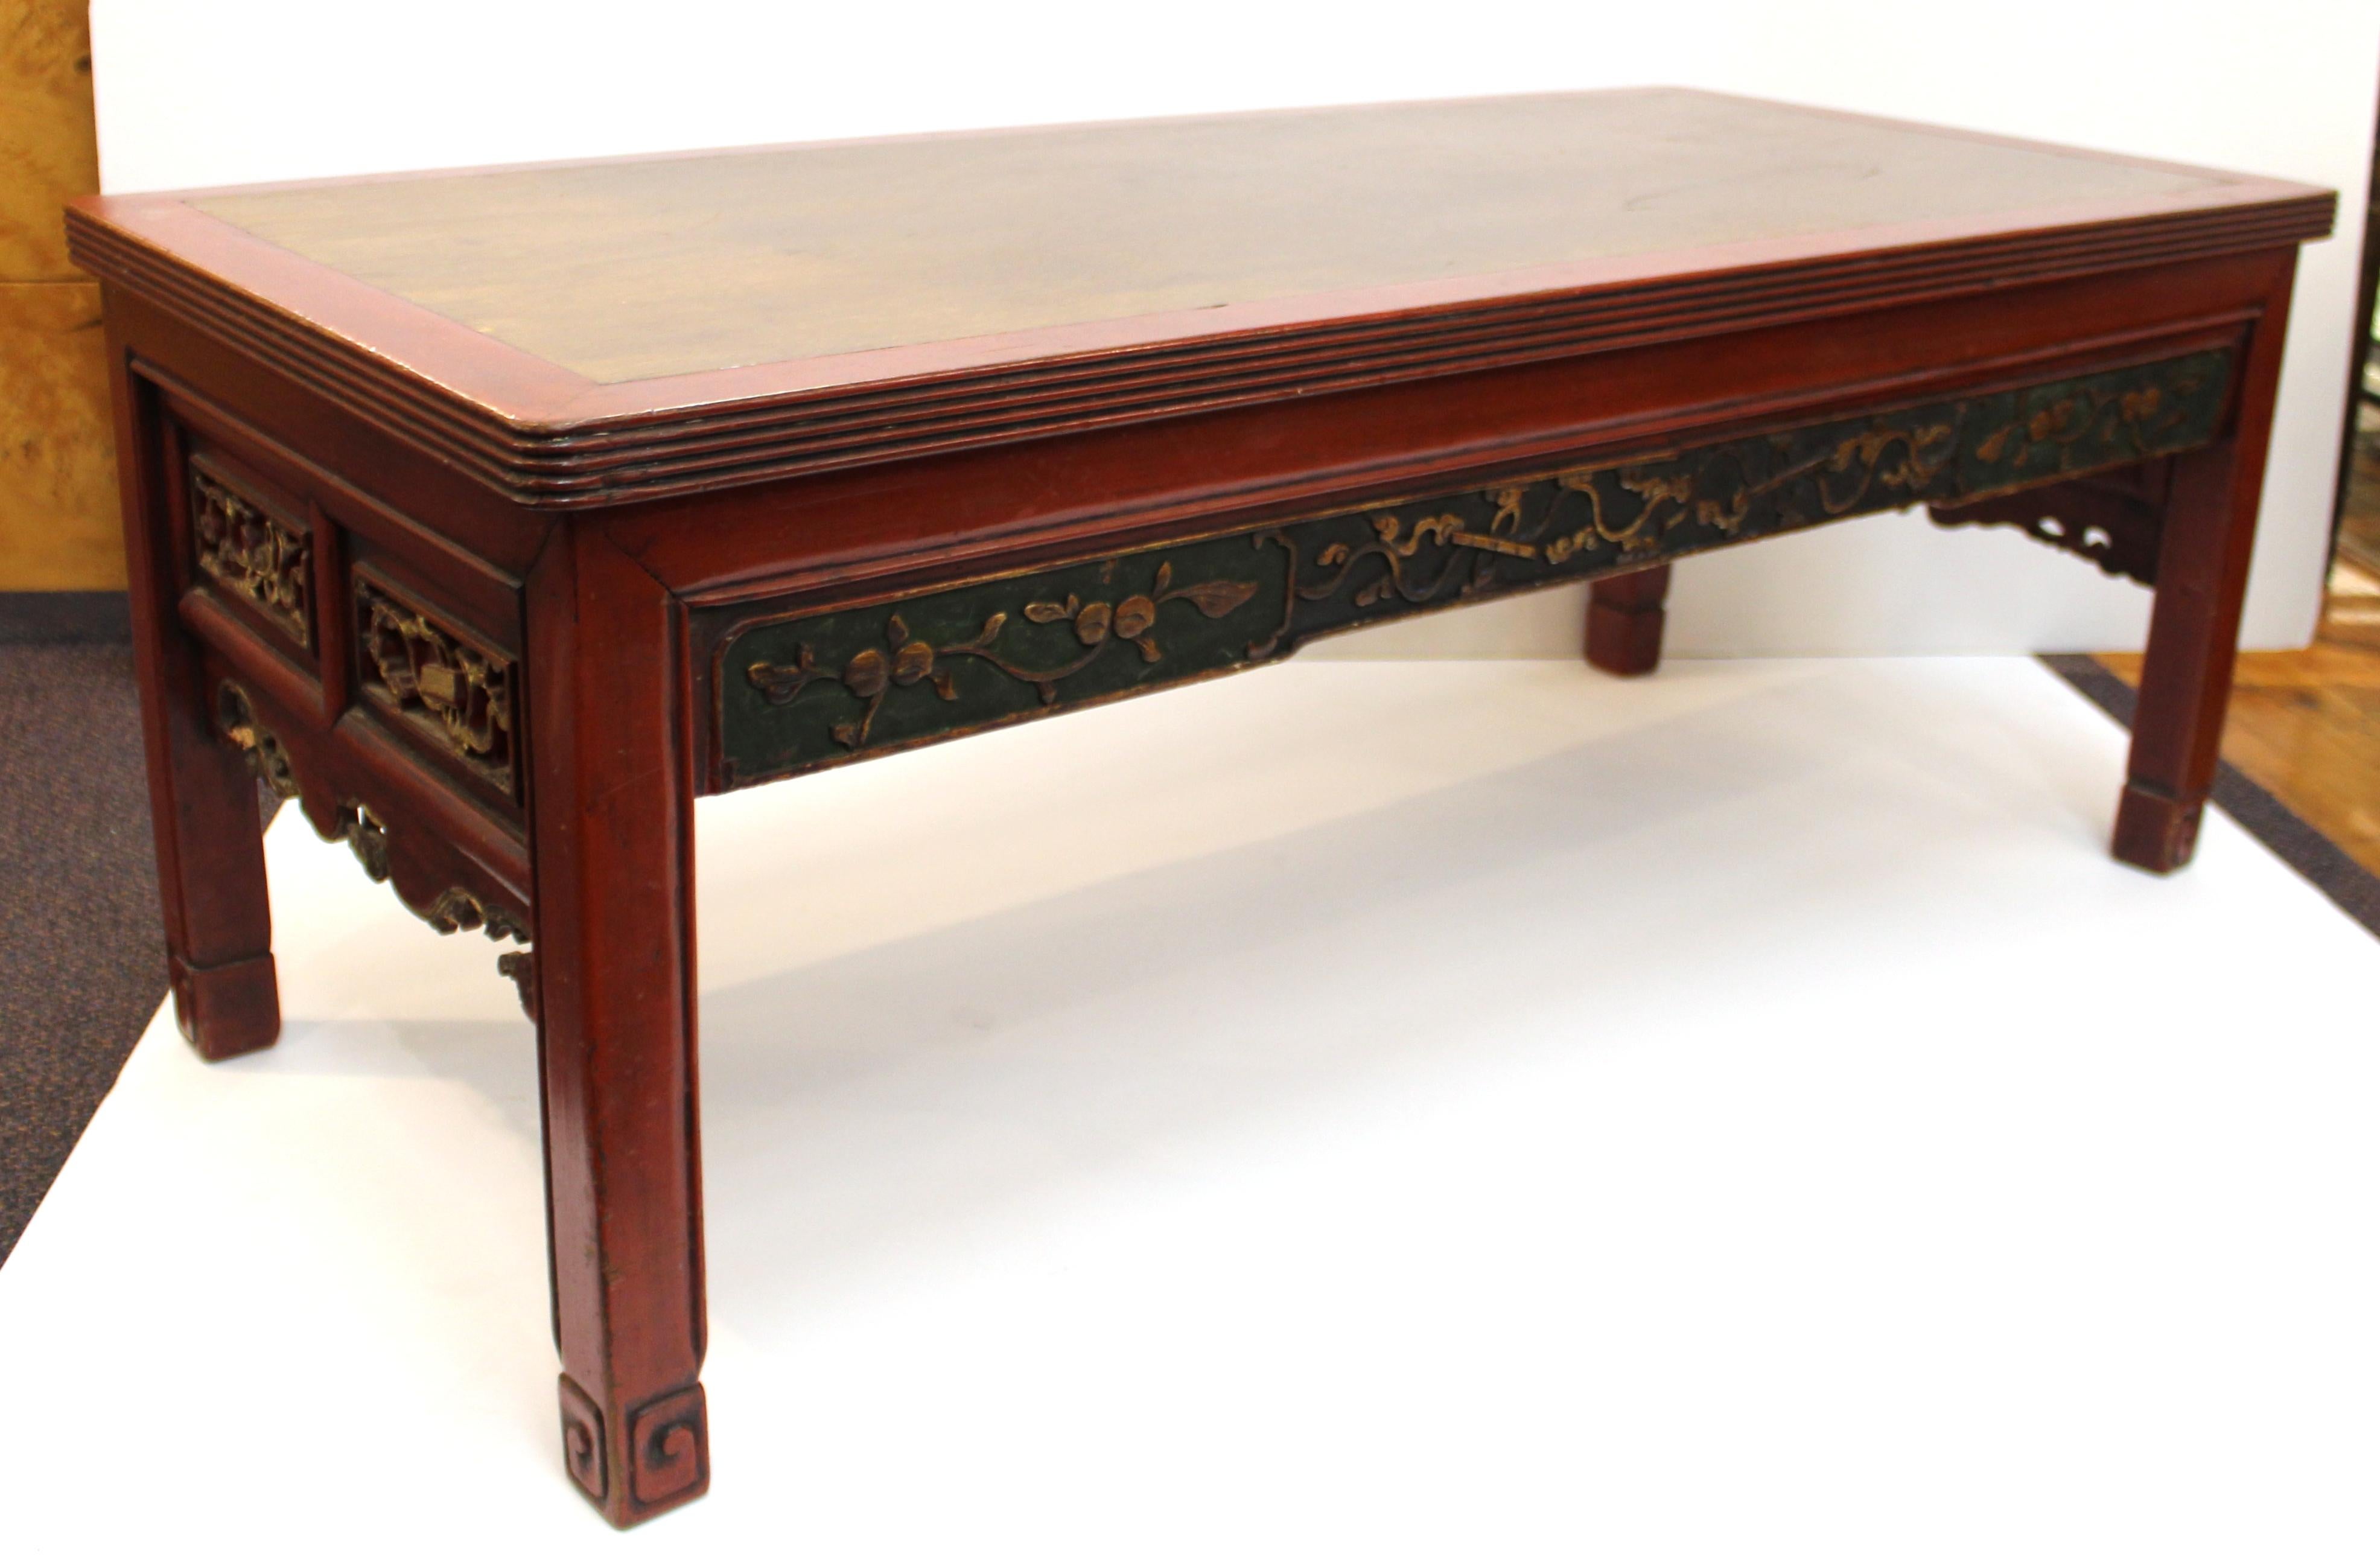 Chinese early 20th century cocktail or coffee table in carved wood, painted in red and gold accents. The piece was made during the 1920s and has a 'China' mark on one of the inside surfaces. In great vintage condition with some age-appropriate wear.